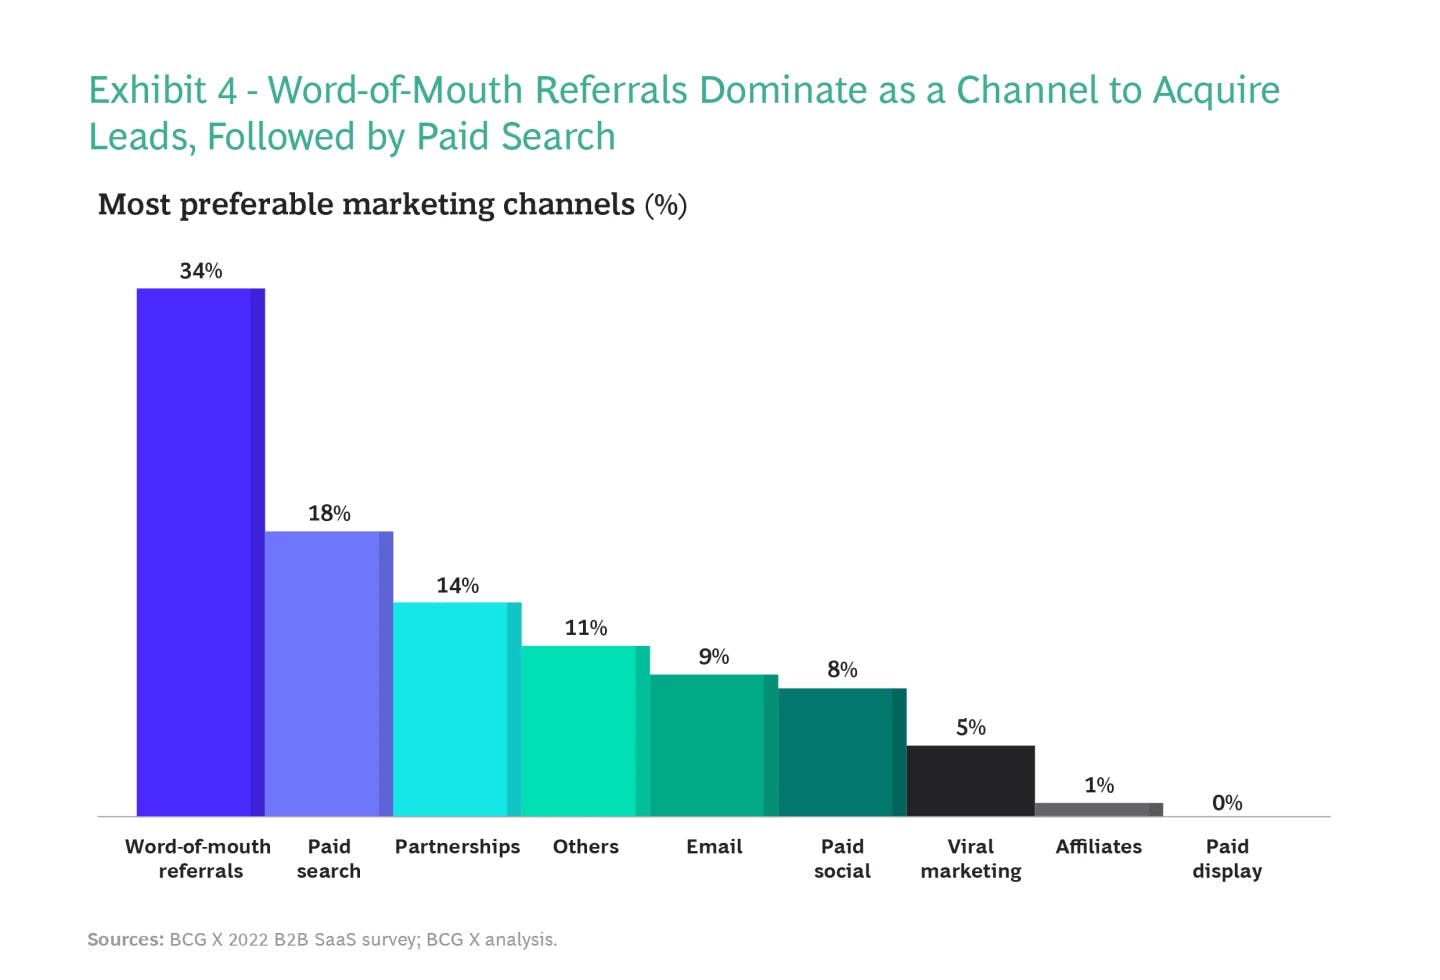 Preferred acqusition channels for B2B SaaS companies